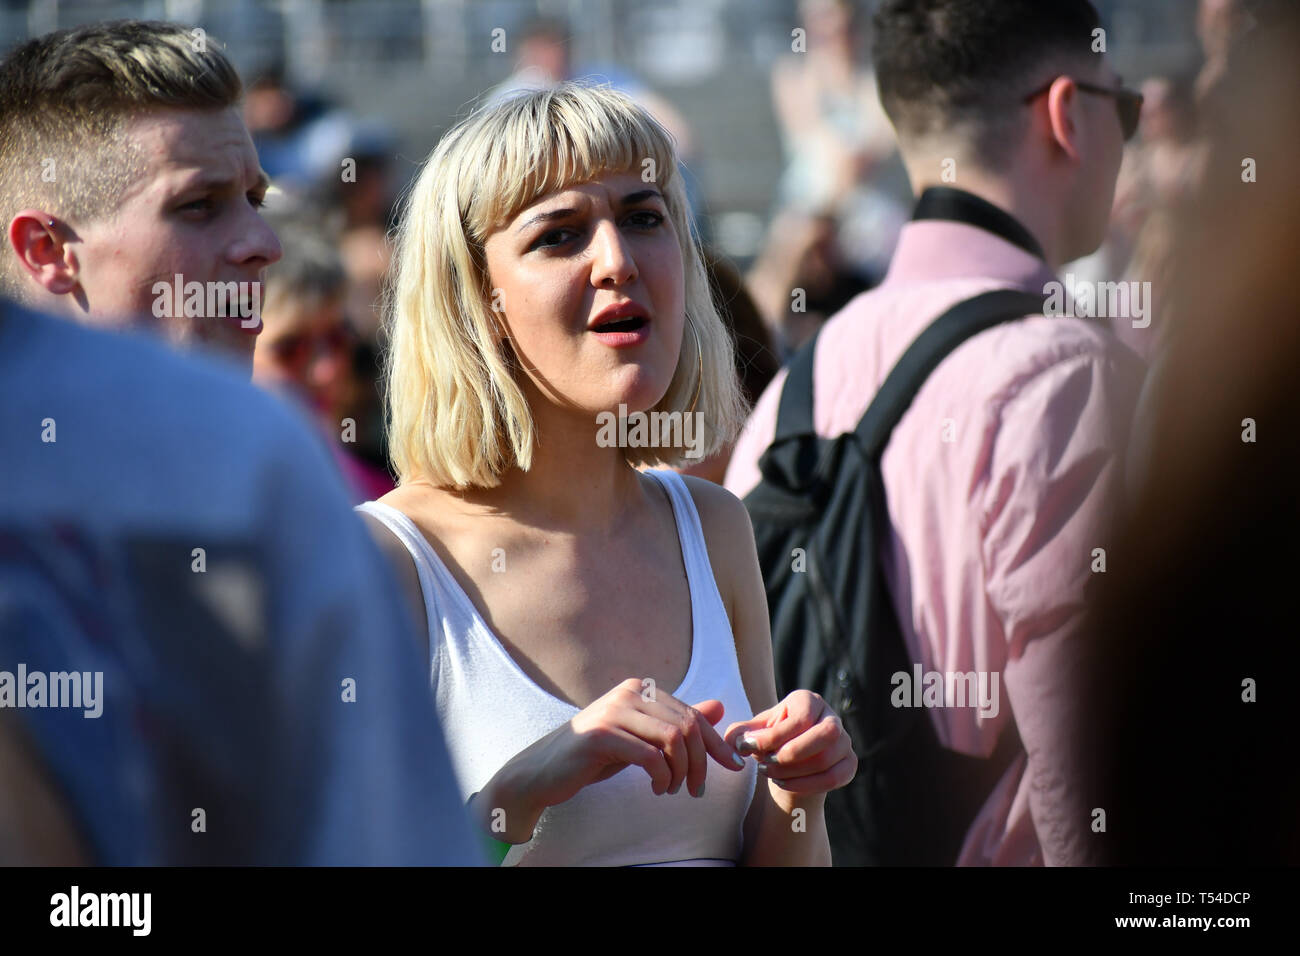 London, UK. 20th April, 2019.Basking in London - Jazz Mino performs at the Feast of St George to celebrate English culture with music and English food stalls in Trafalgar Square on 20 April 2019, London, UK. Credit: Picture Capital/Alamy Live News Stock Photo